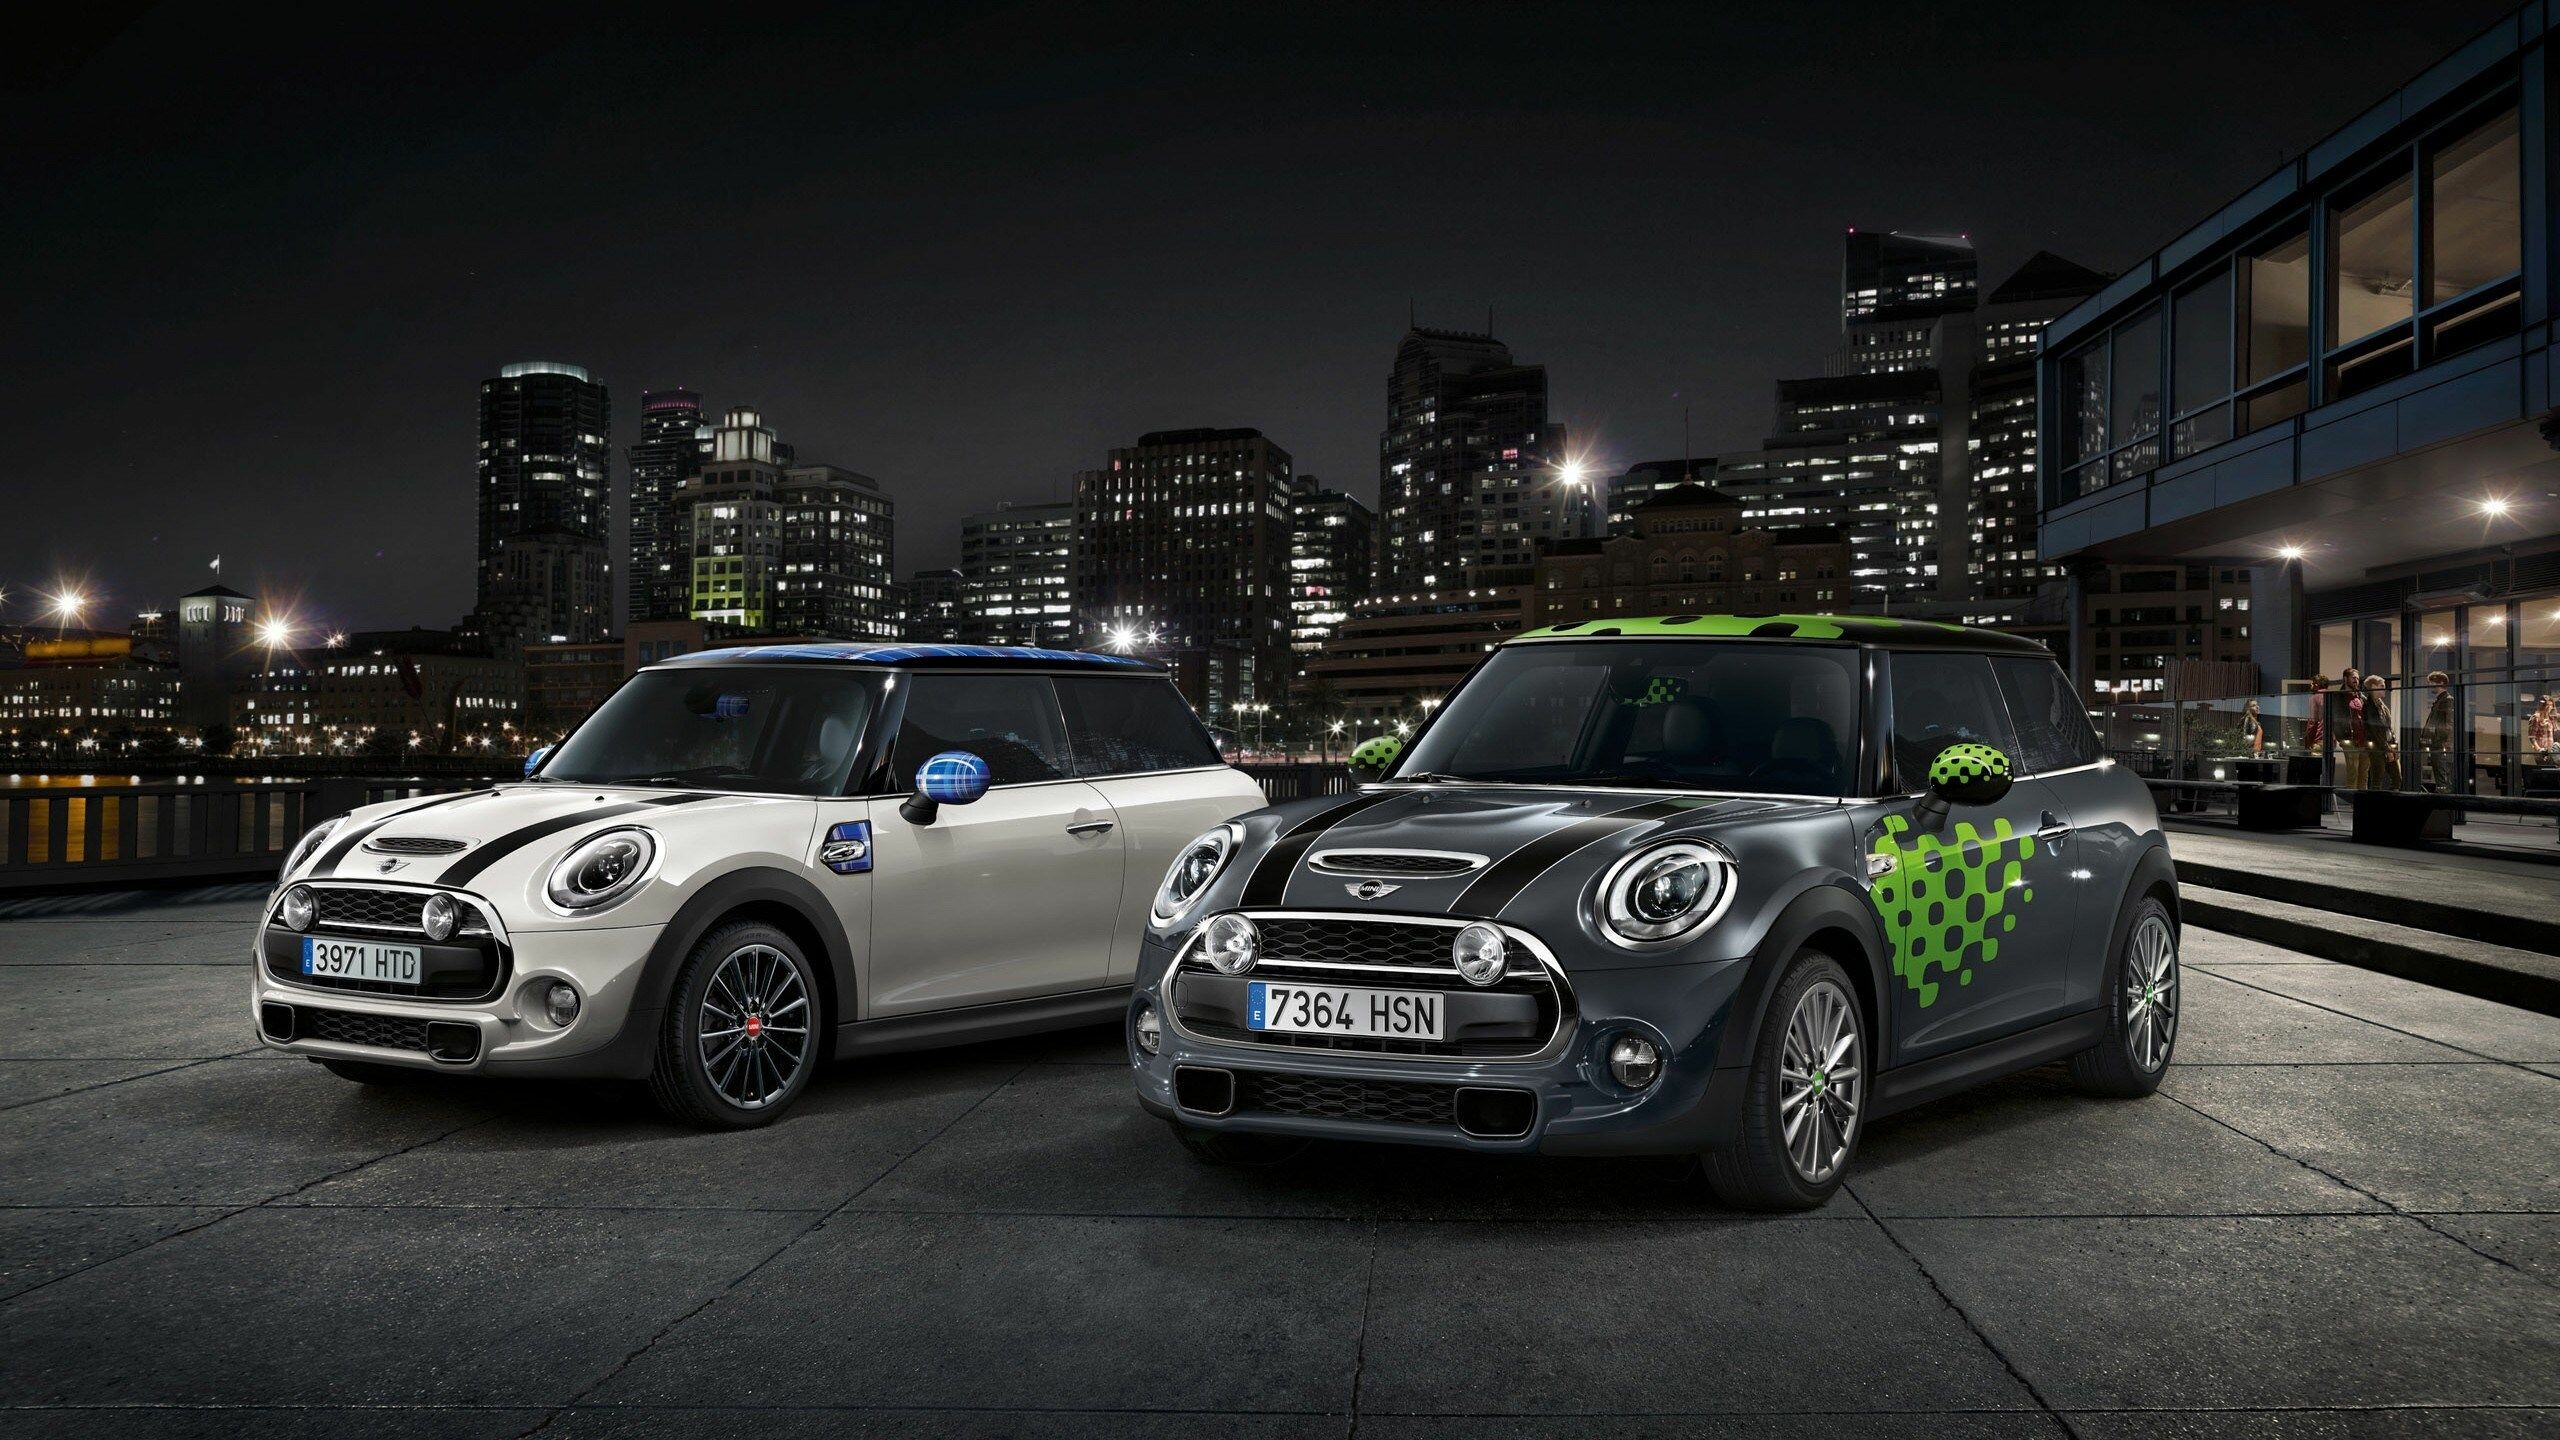 MINI Cooper: An entirely new brand's model was launched in 2001 by BMW. 2560x1440 HD Background.